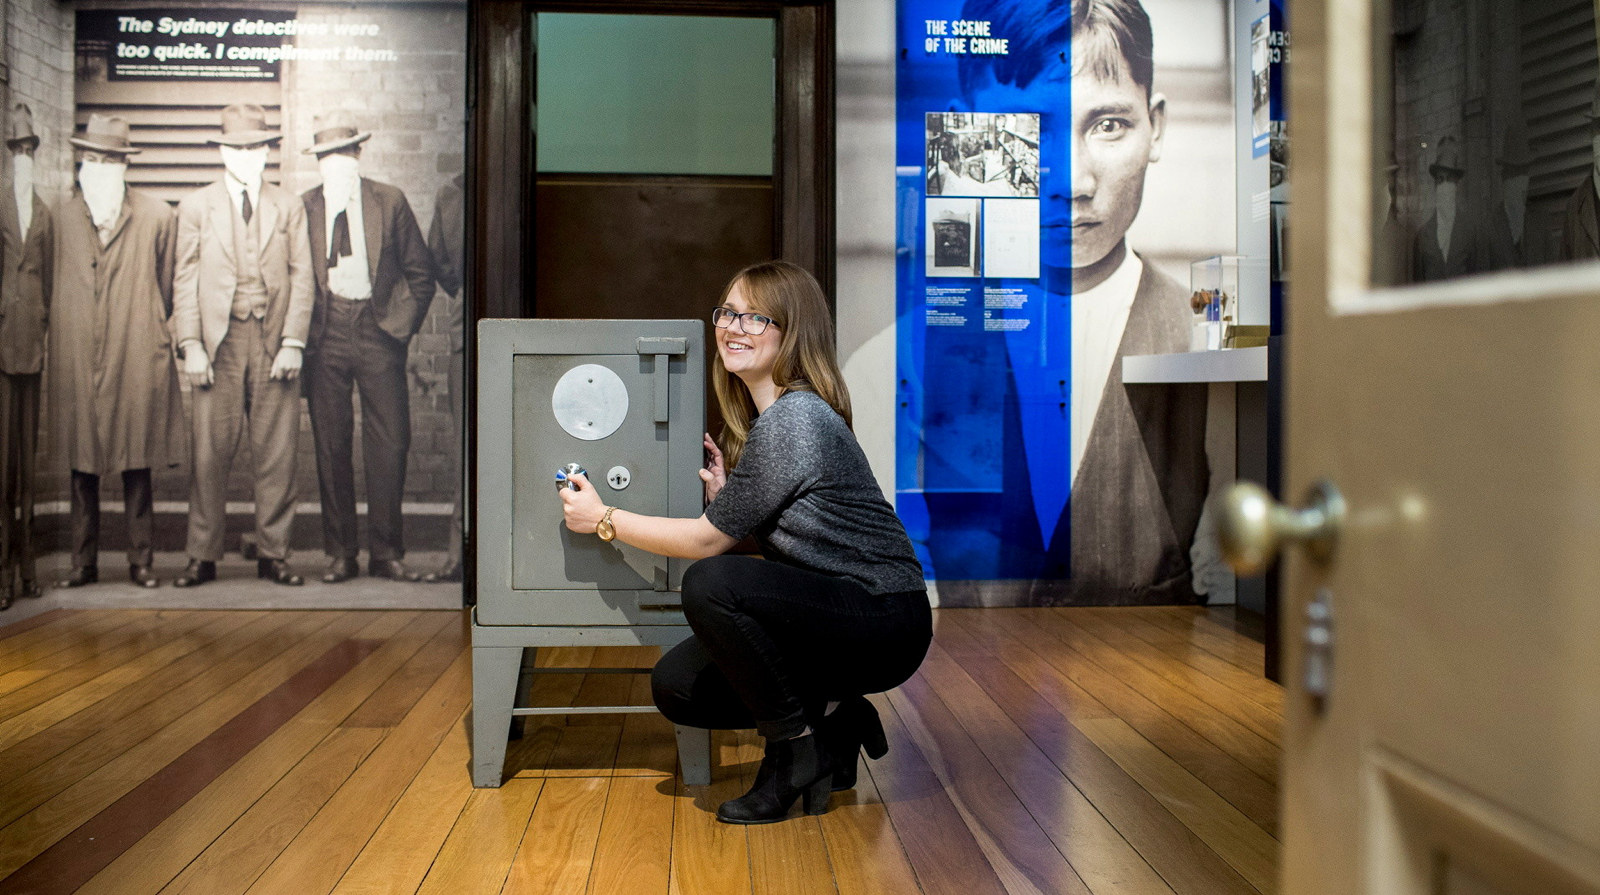 A woman trying to open a safe at the Justice and Police Museum